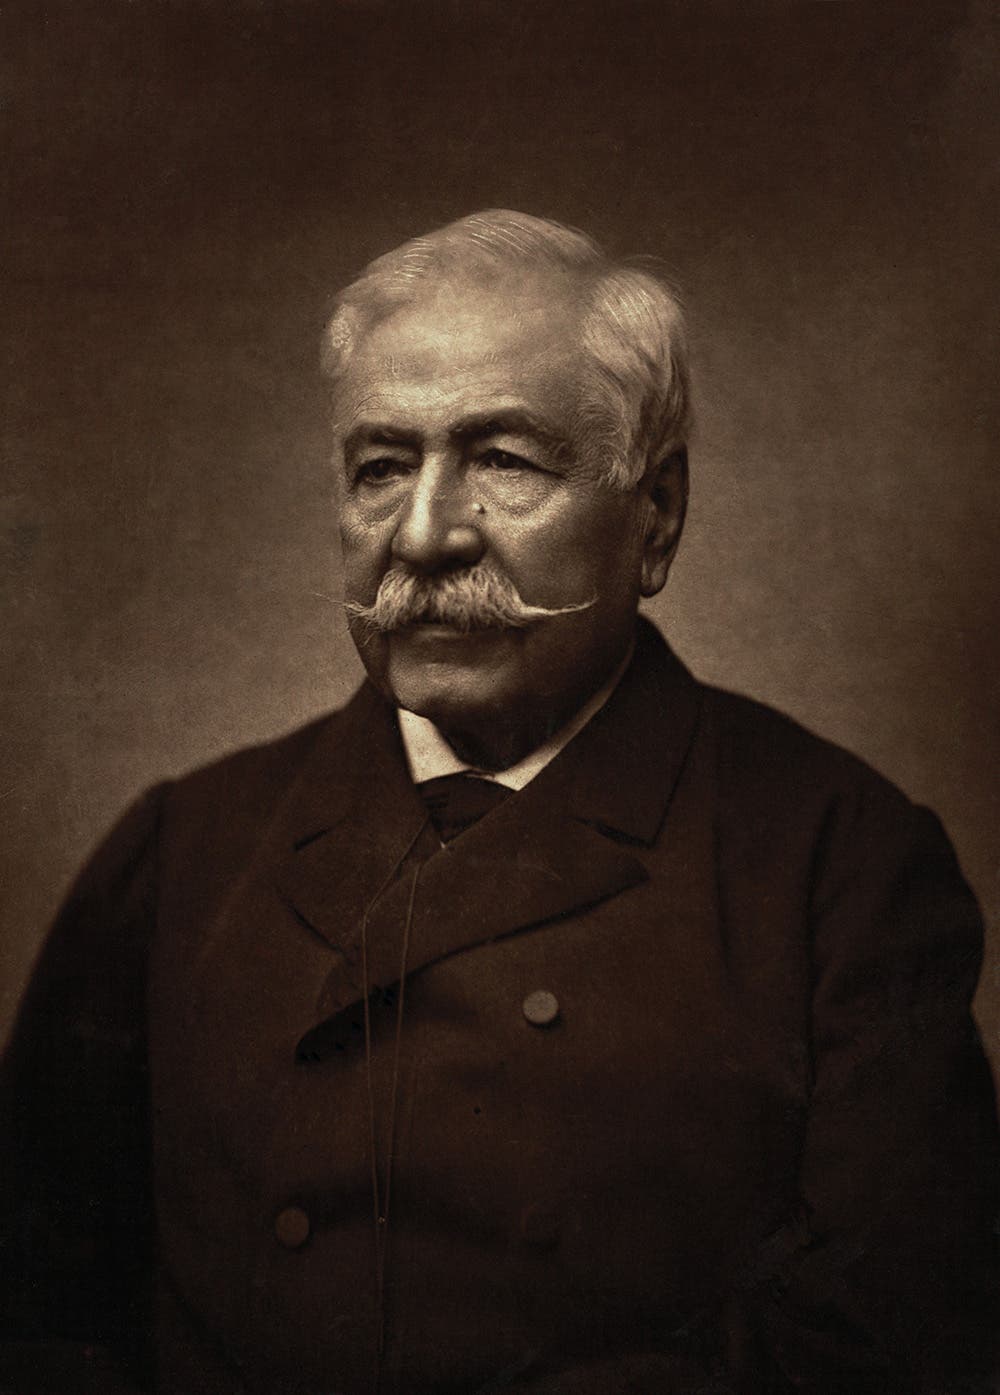 Portait of Ferdinand de Lesseps.
After a career as a diplomat Ferdinand de Lesseps gained international fame as the builder of the Suez Canal. In 1879 at age 74, he became President of the Compagnie Universelle du Canal Interoceanique. Though he was not an engineer, he was considered the perfect choice to lead the enormous technical enterprise of building a canal across the Isthmus of Panama. View in Digital Collection »